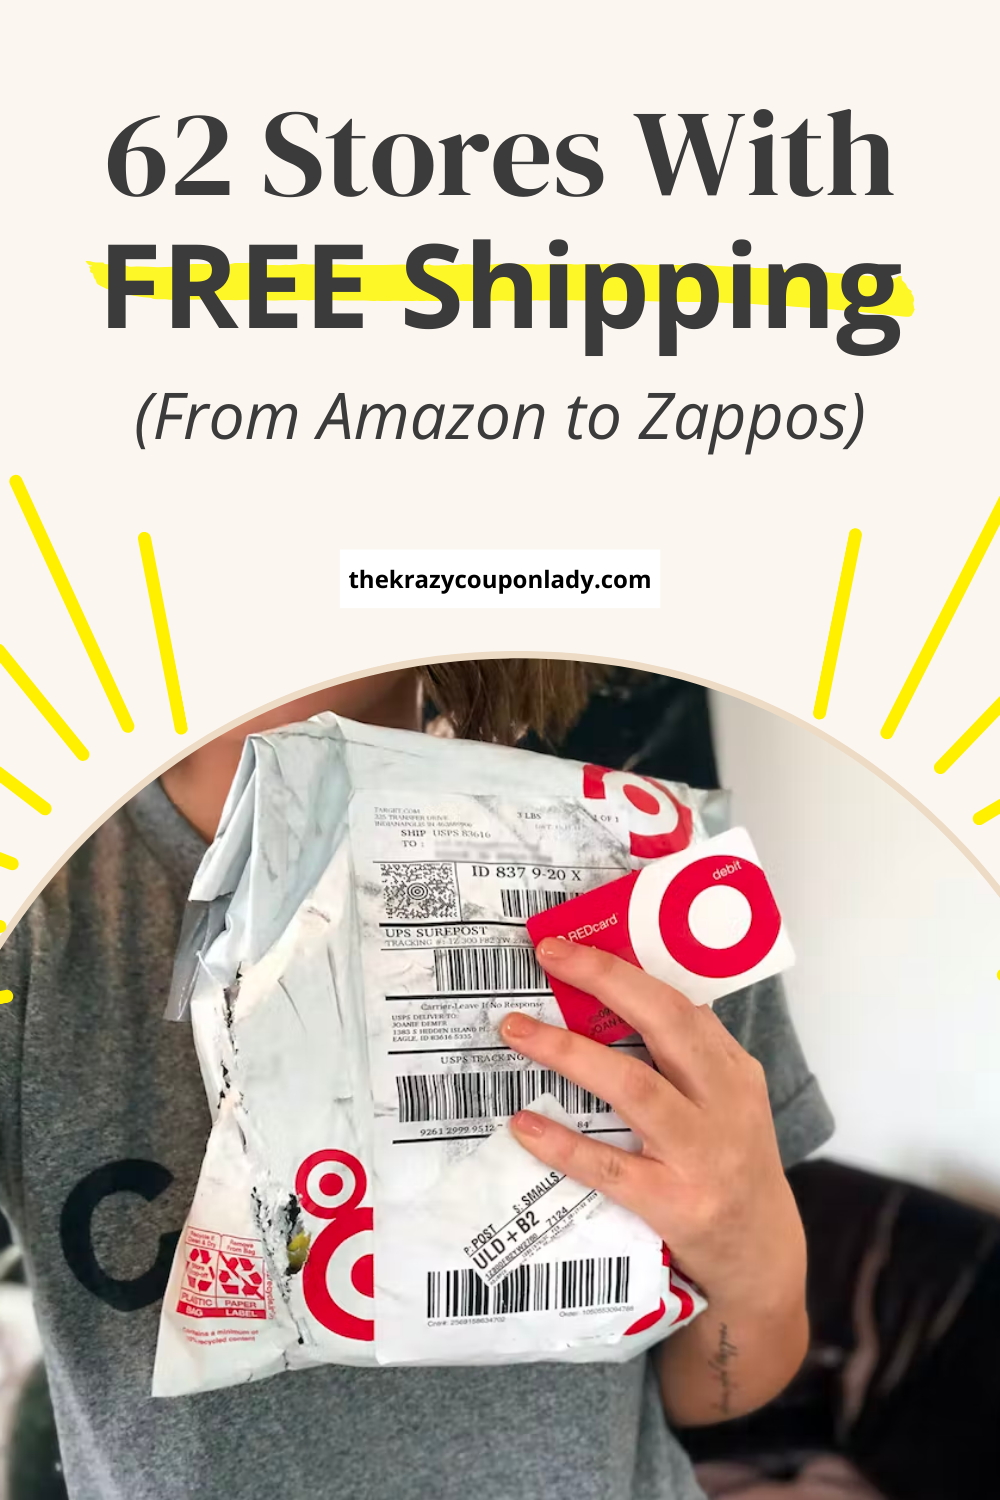 https://thekrazycouponlady.com/wp-content/uploads/2016/09/stores-with-free-shipping-1666621352-1666621352.png